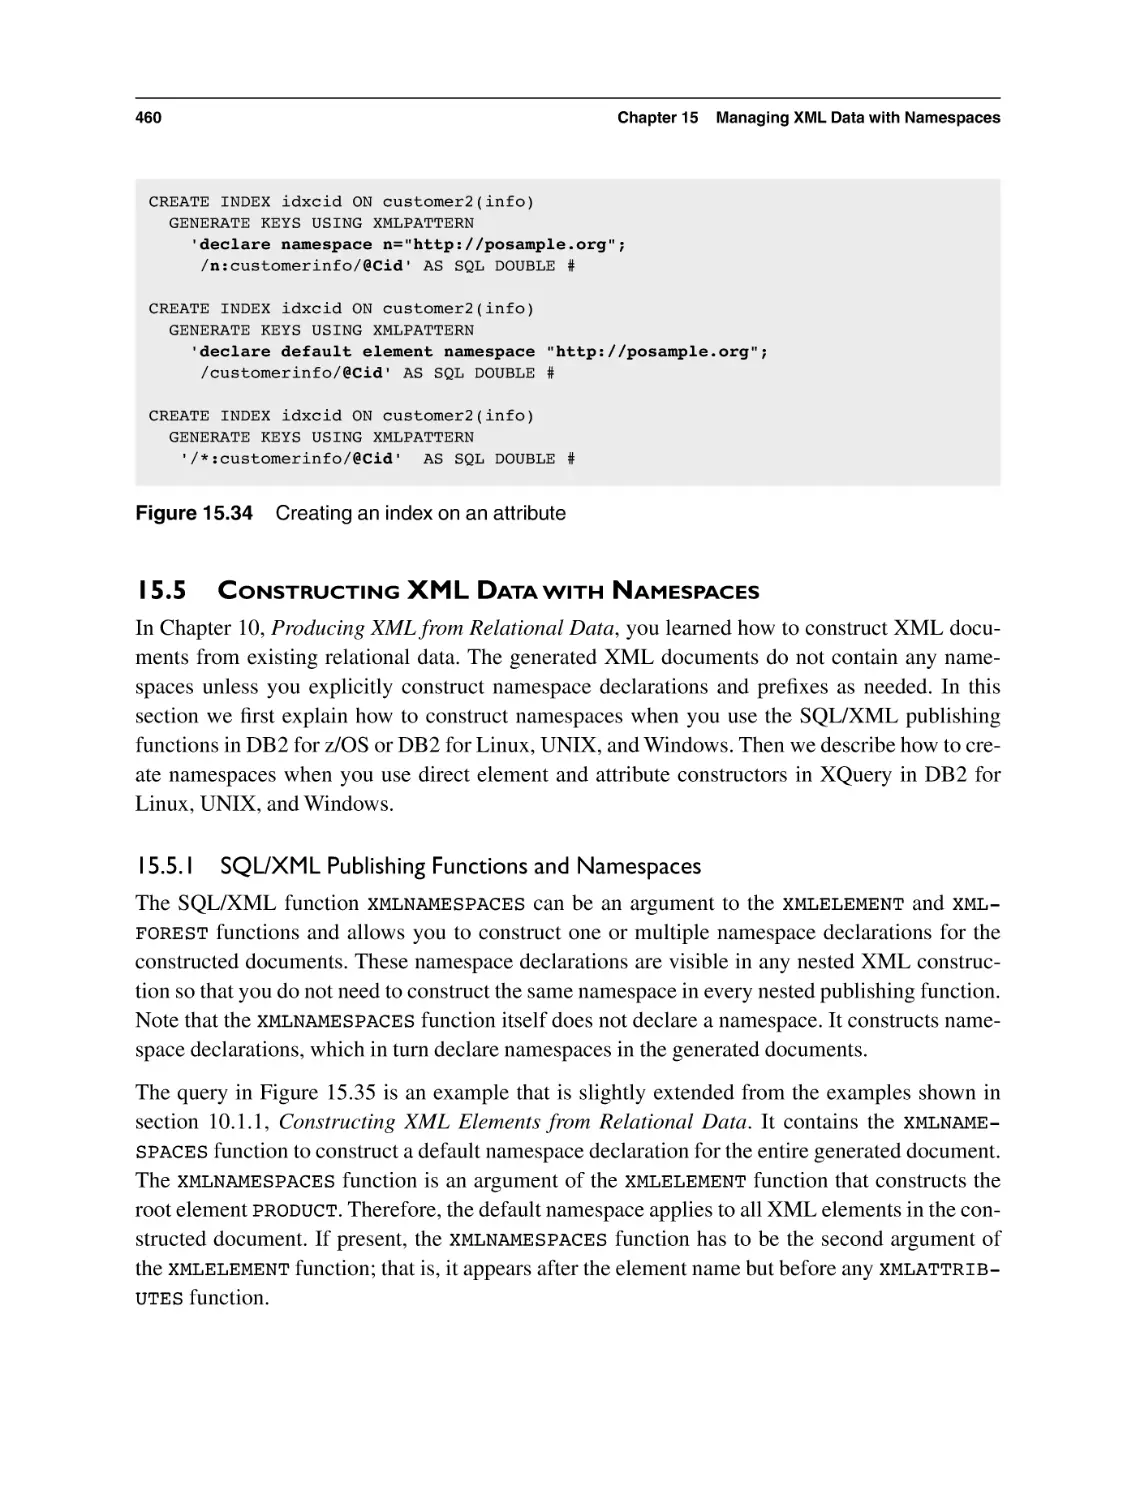 15.5 Constructing XML Data with Namespaces
15.5.1 SQL/XML Publishing Functions and Namespaces